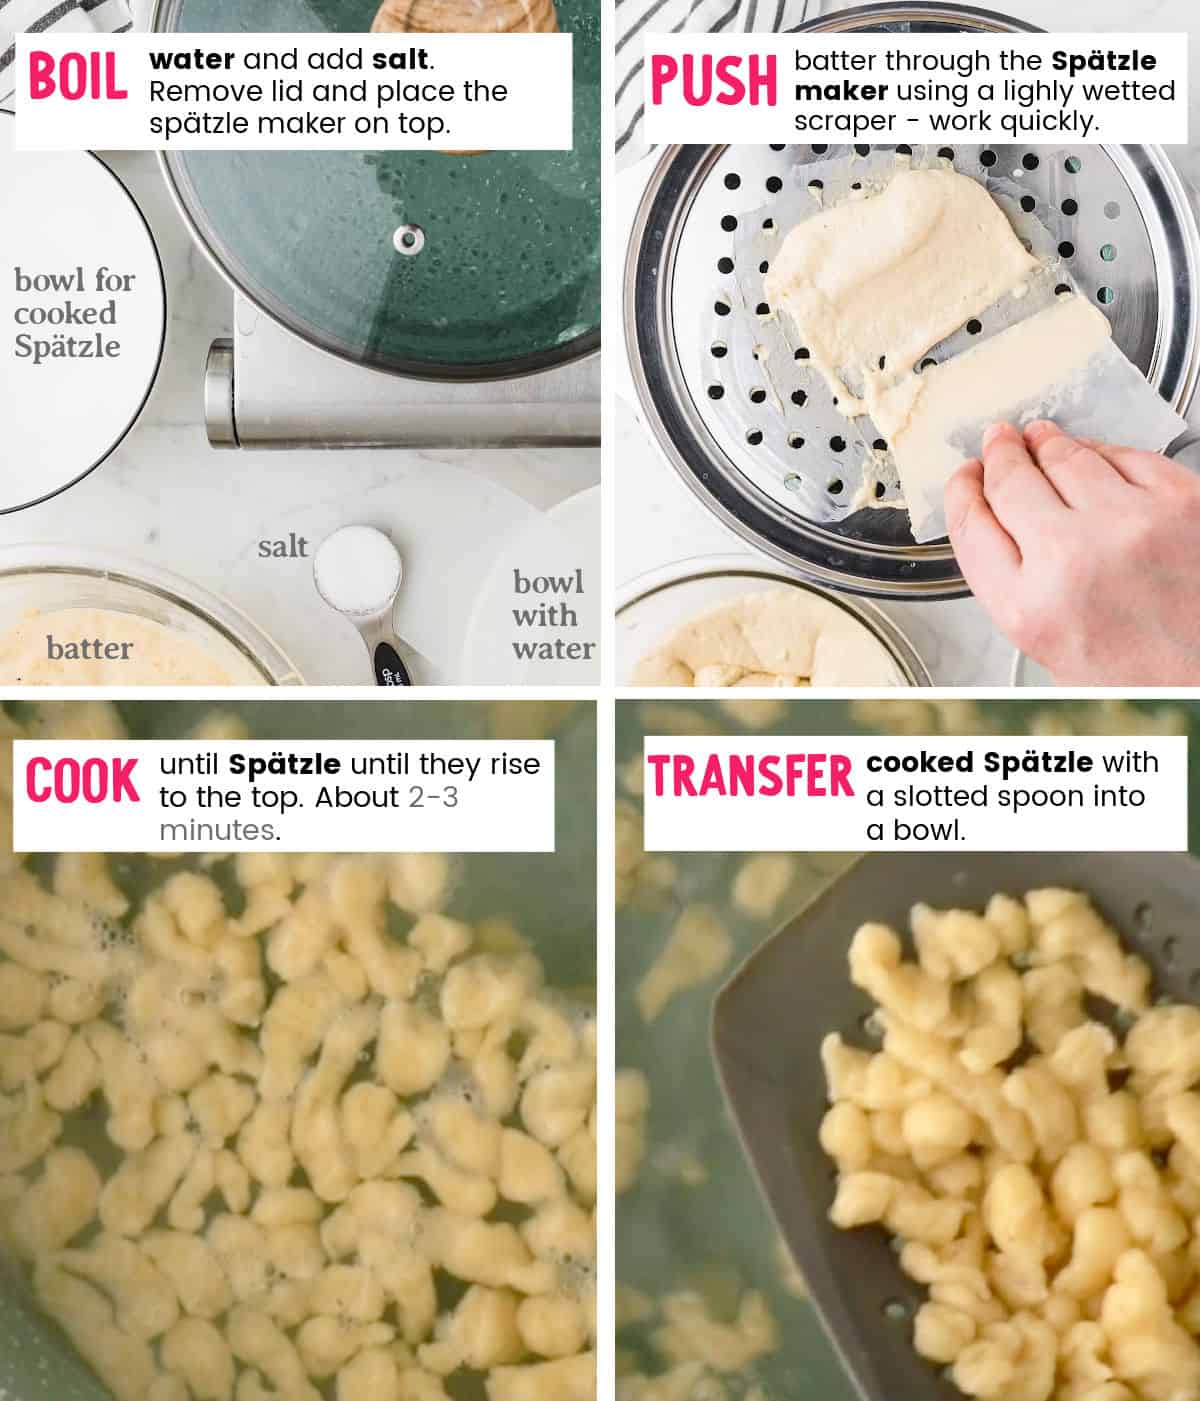 Steps showing how to cook the spätzle in boiling salt water.